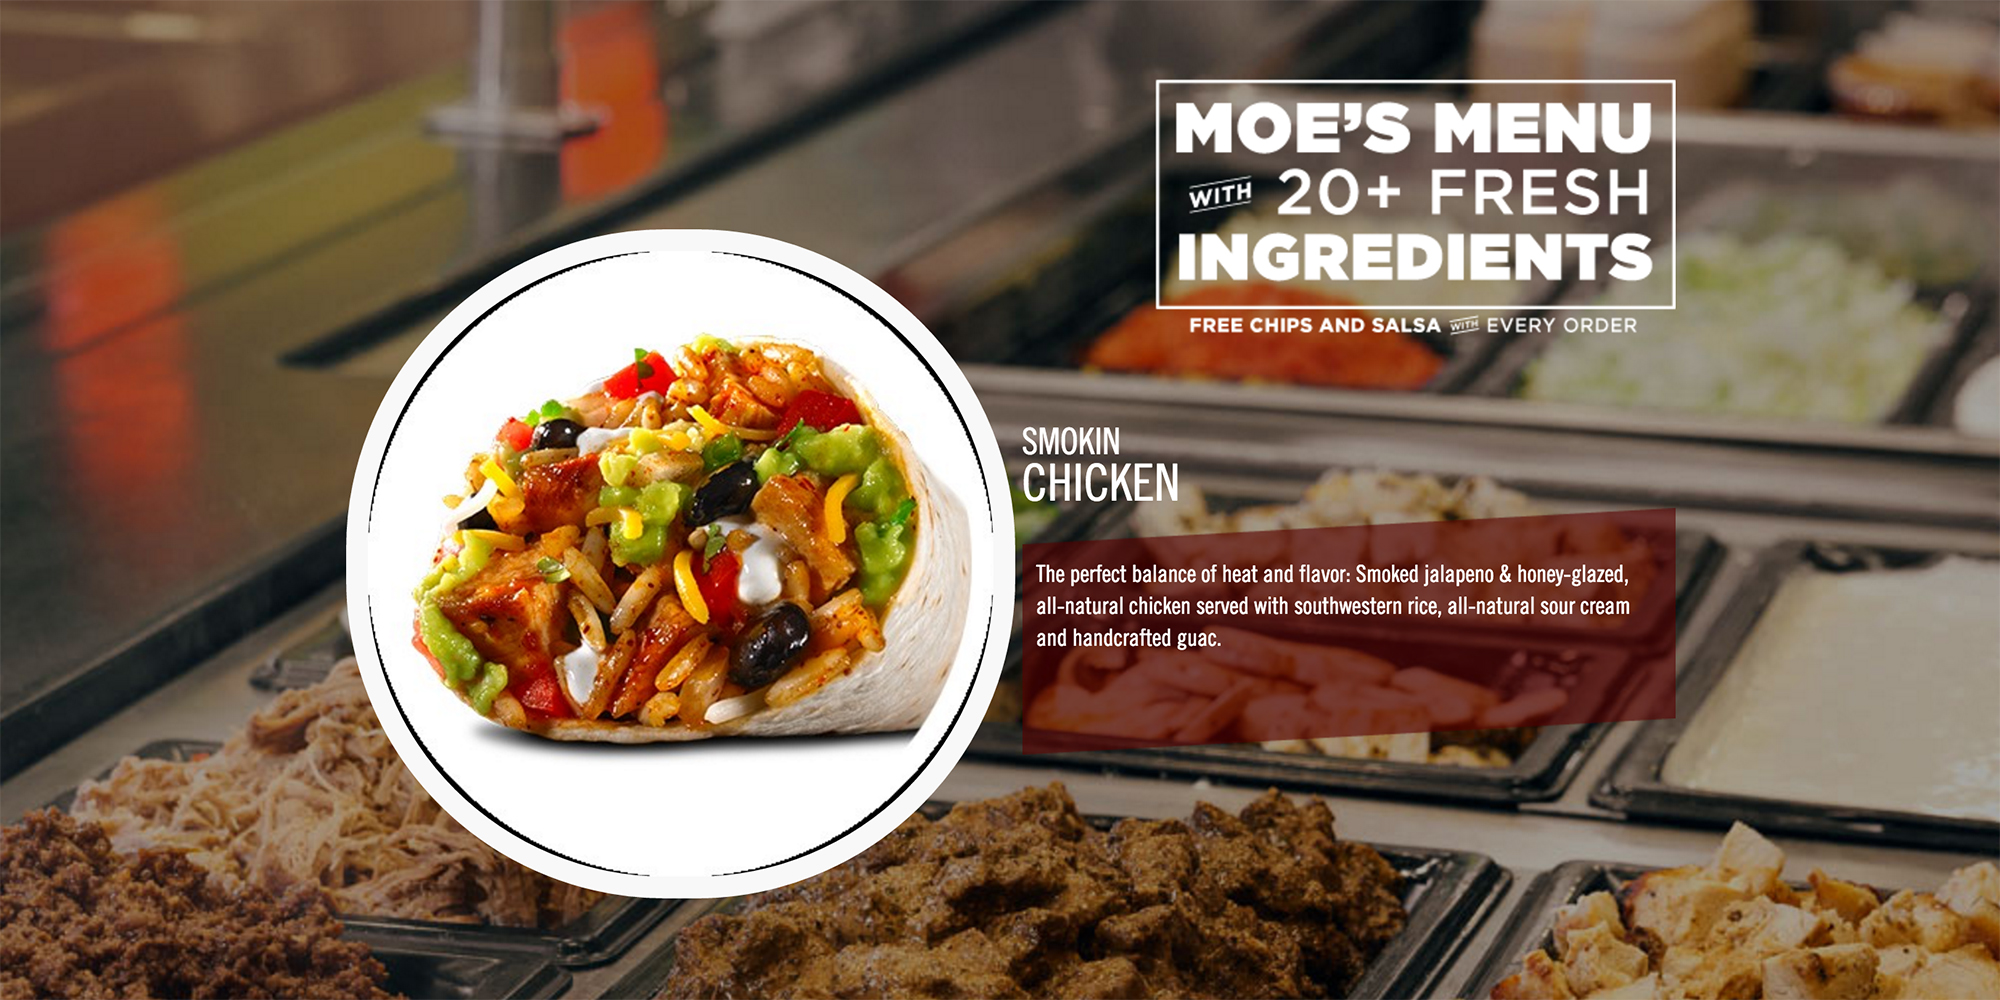 Moe’s Southwest Grill Buy One, Get One Free burrito promotion get